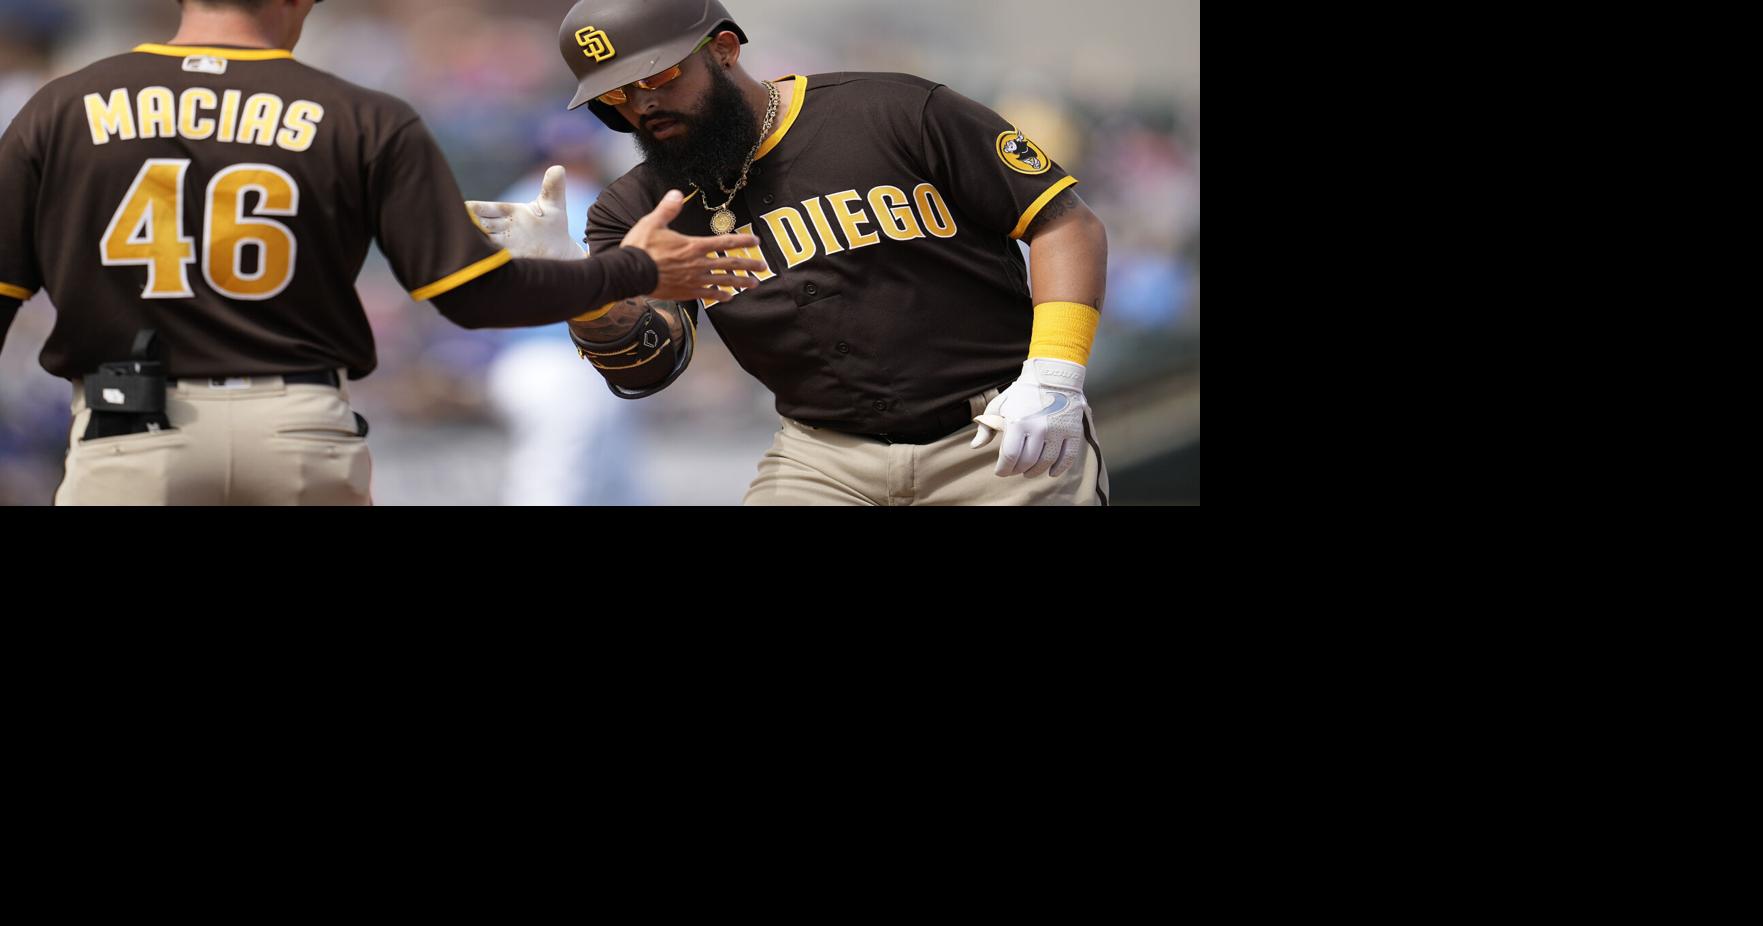 San Diego Padres: New brown jerseys signal the start of winning in 2020